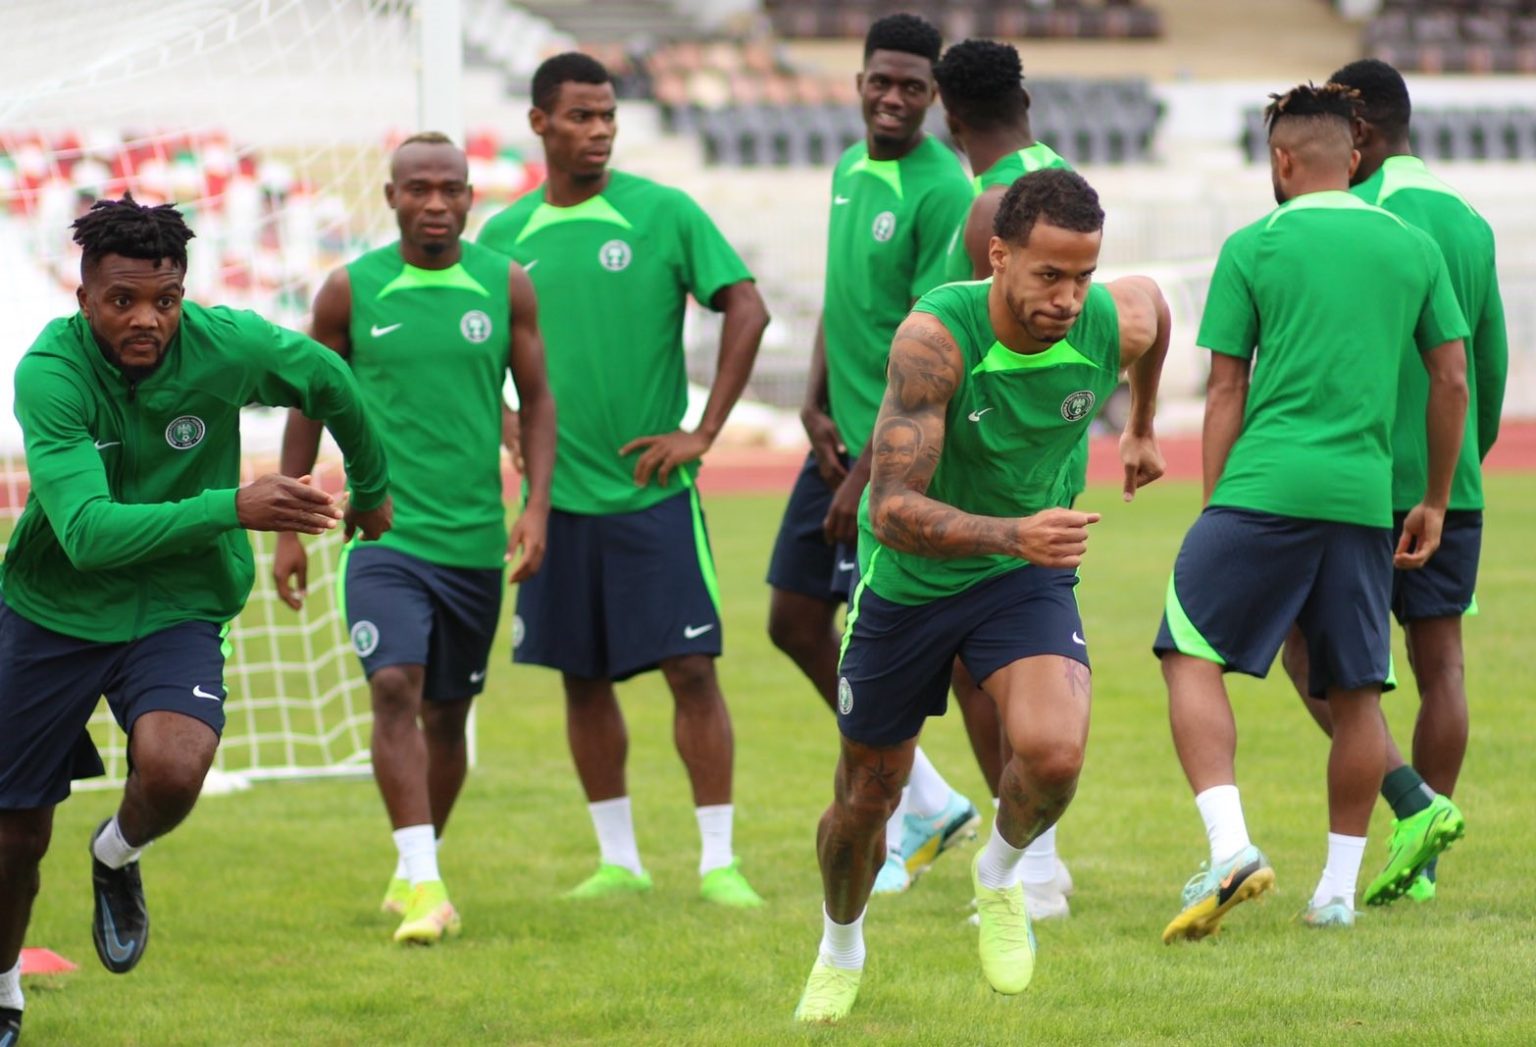 Super-Eagles-during-training-session